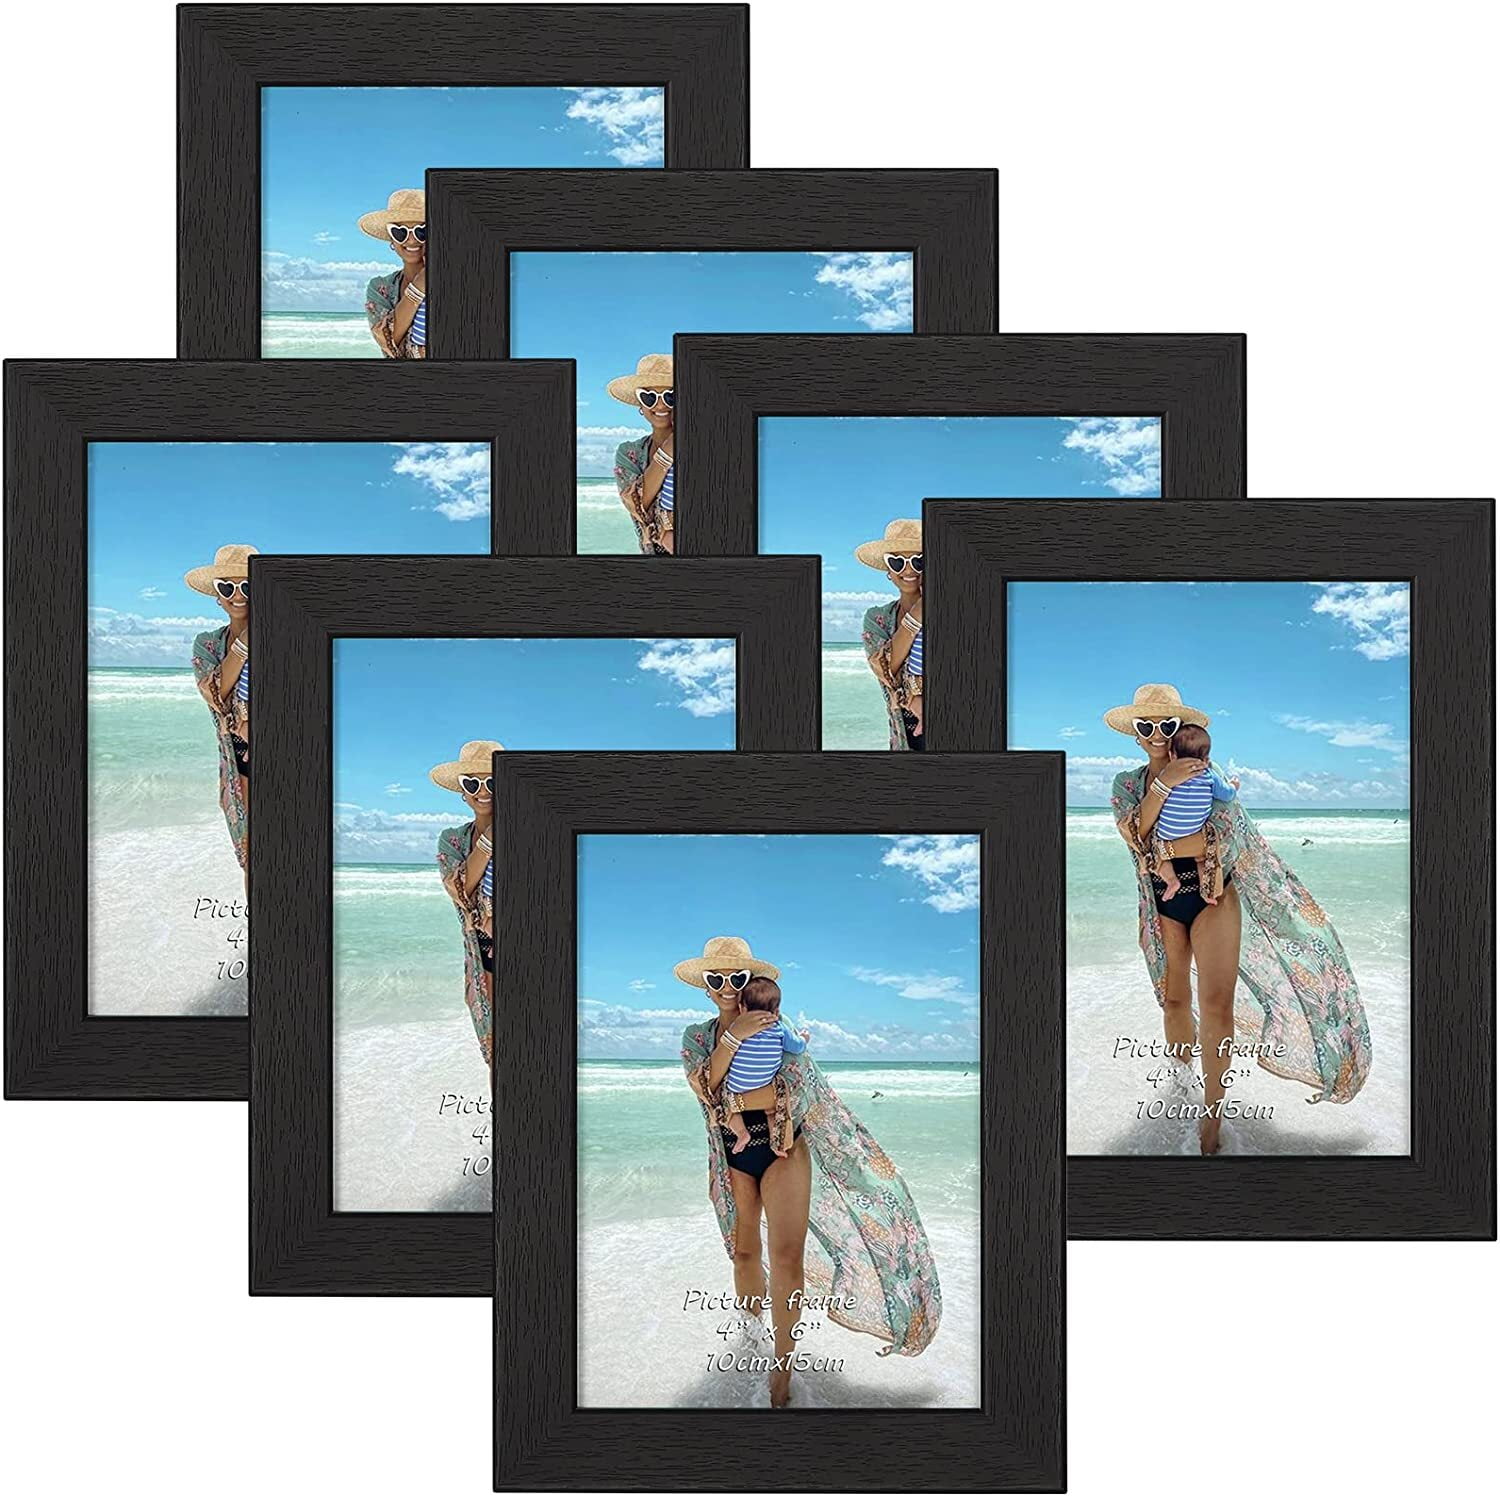  Beyond Your Thoughts 8x10 Picture Photo Frame 1 Pack Antique  with Matted for 5X7 Peacock Blue Color Plastic, Vertical or Horizontal,  Table Top and Wall Mounting Display